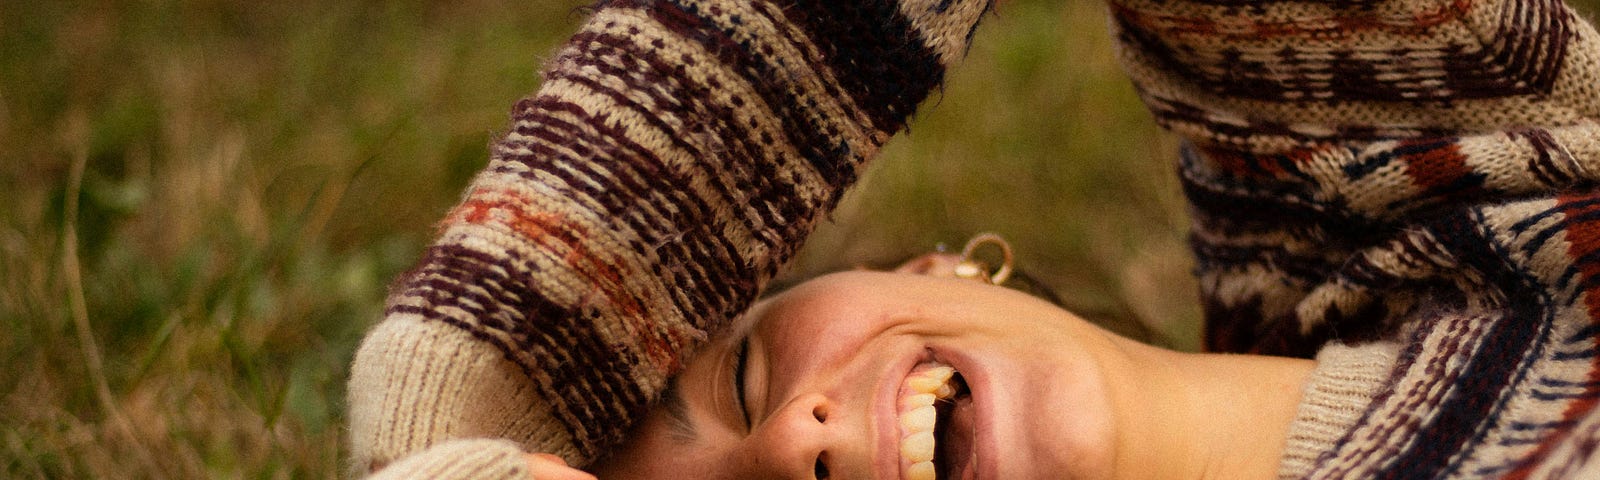 A woman laying in the grass, laughing.